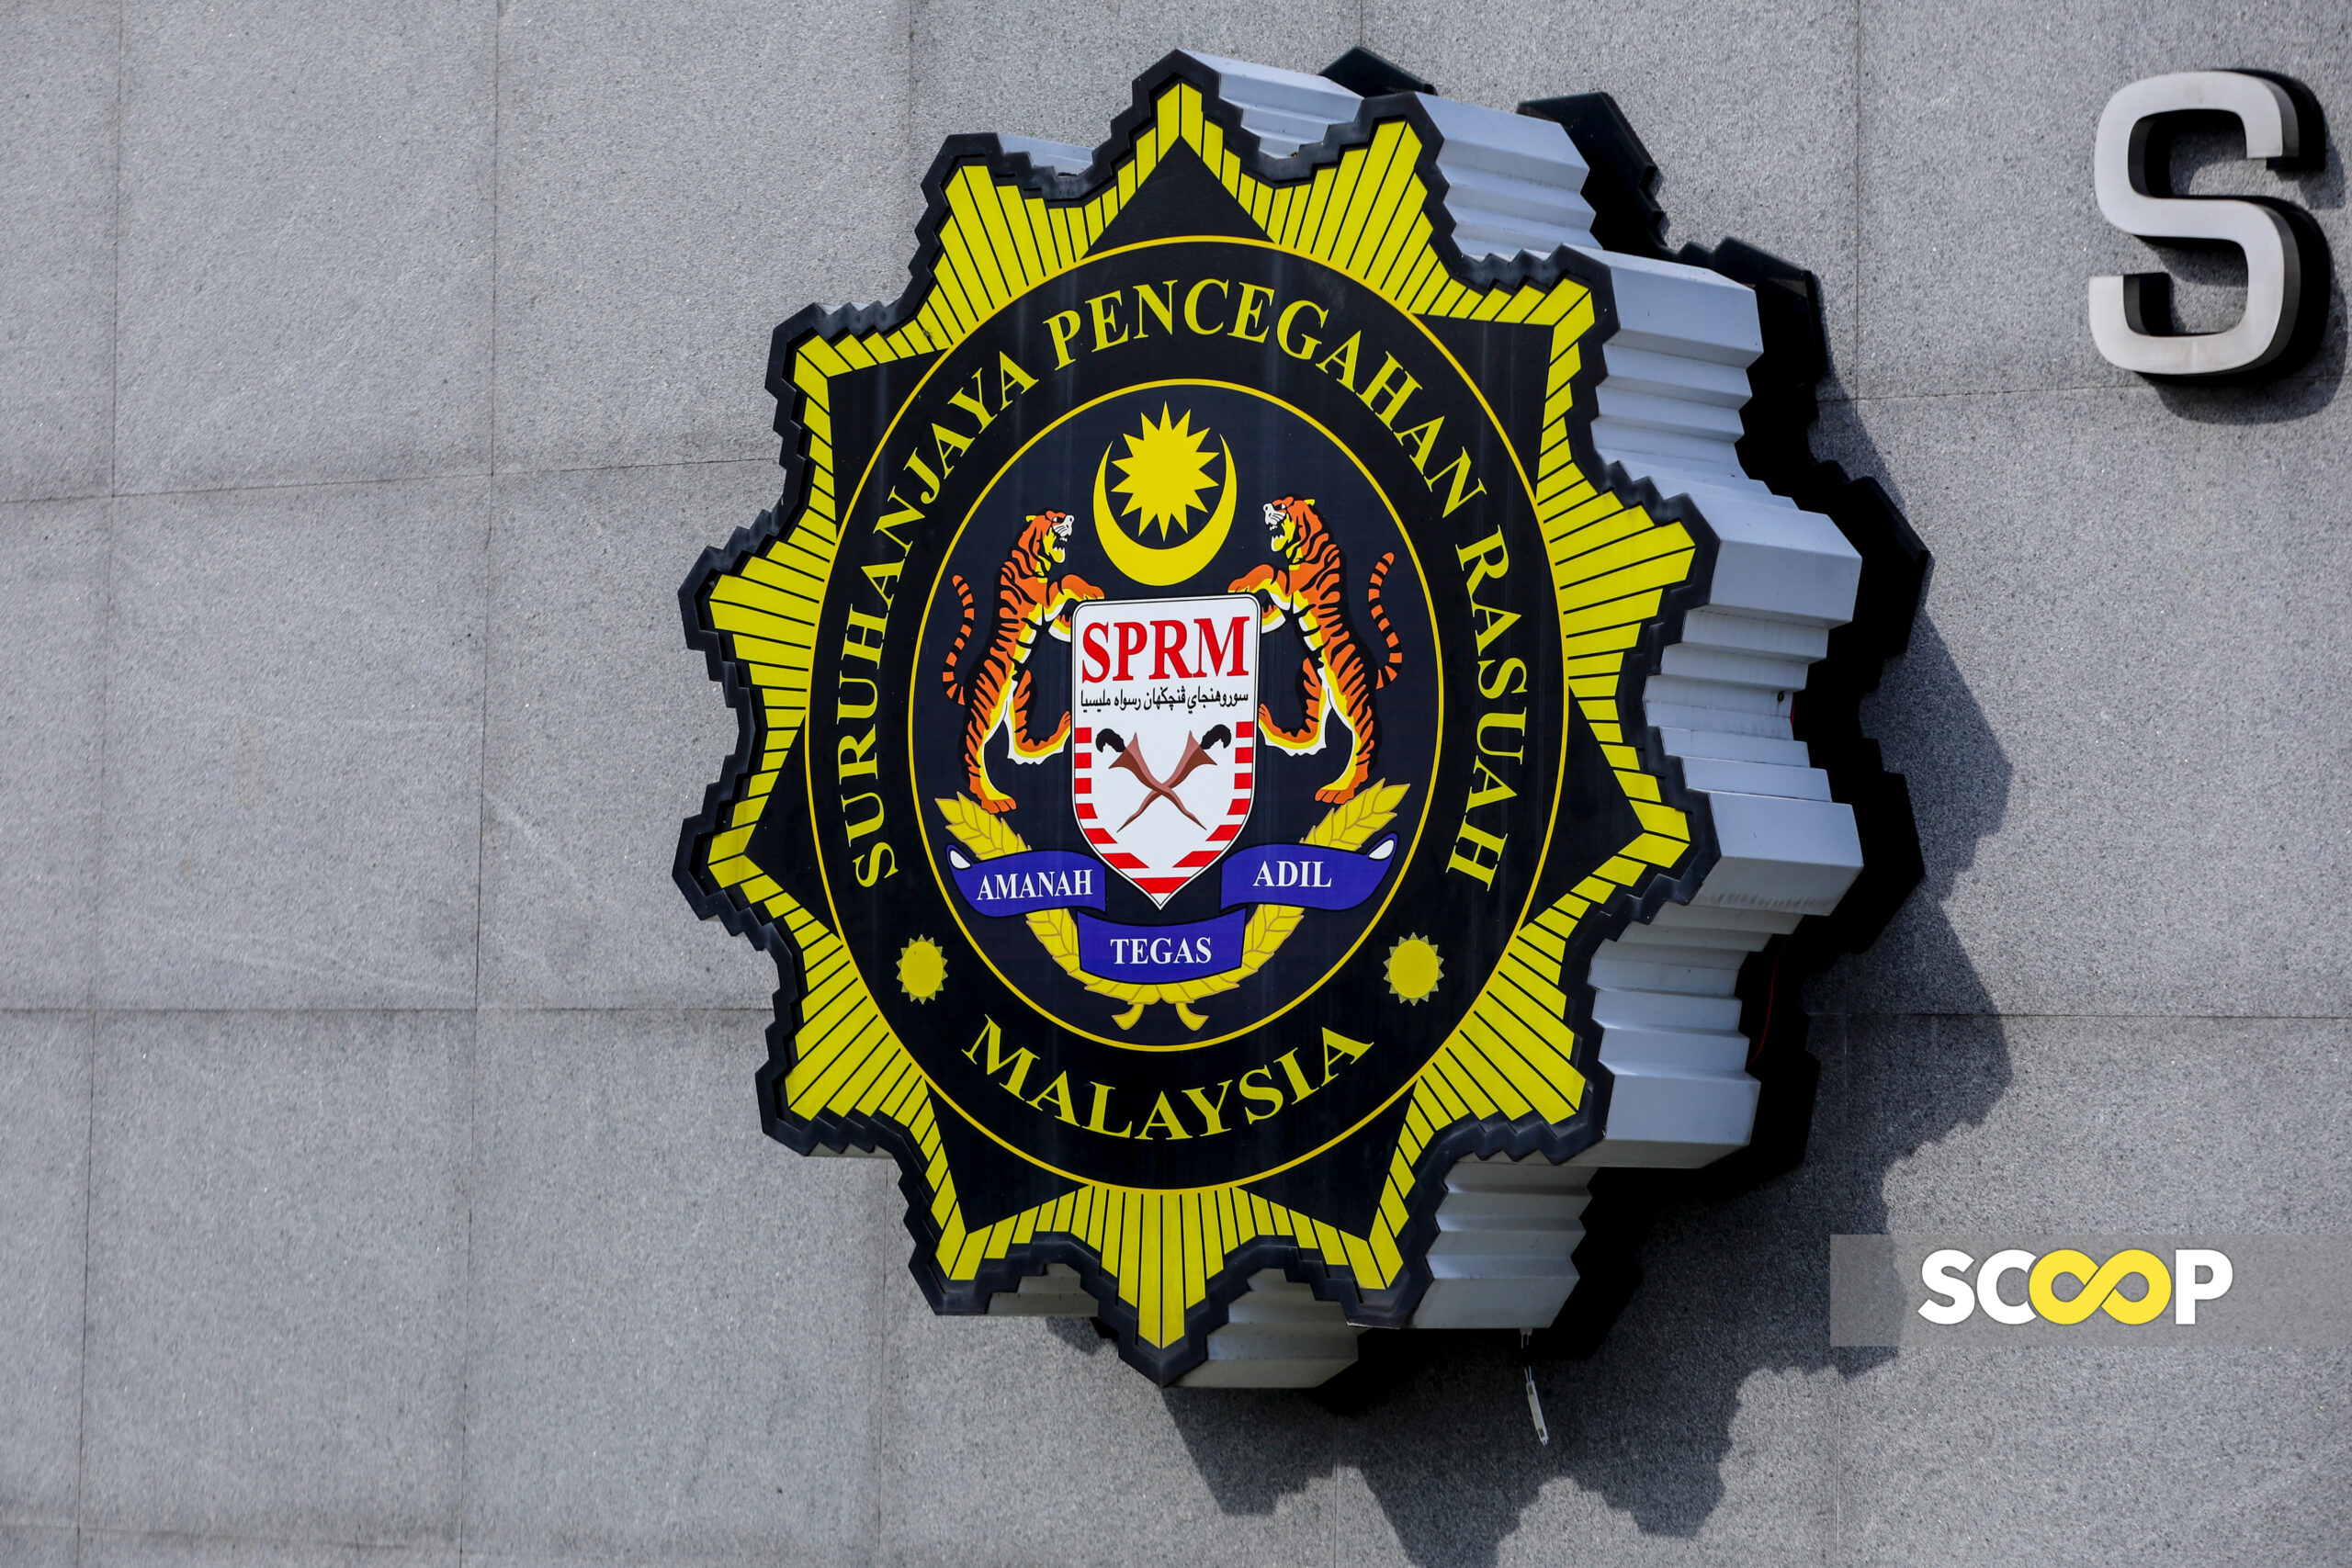 Father-son duo nabbed for RM10,000 bribery in PPR scheme